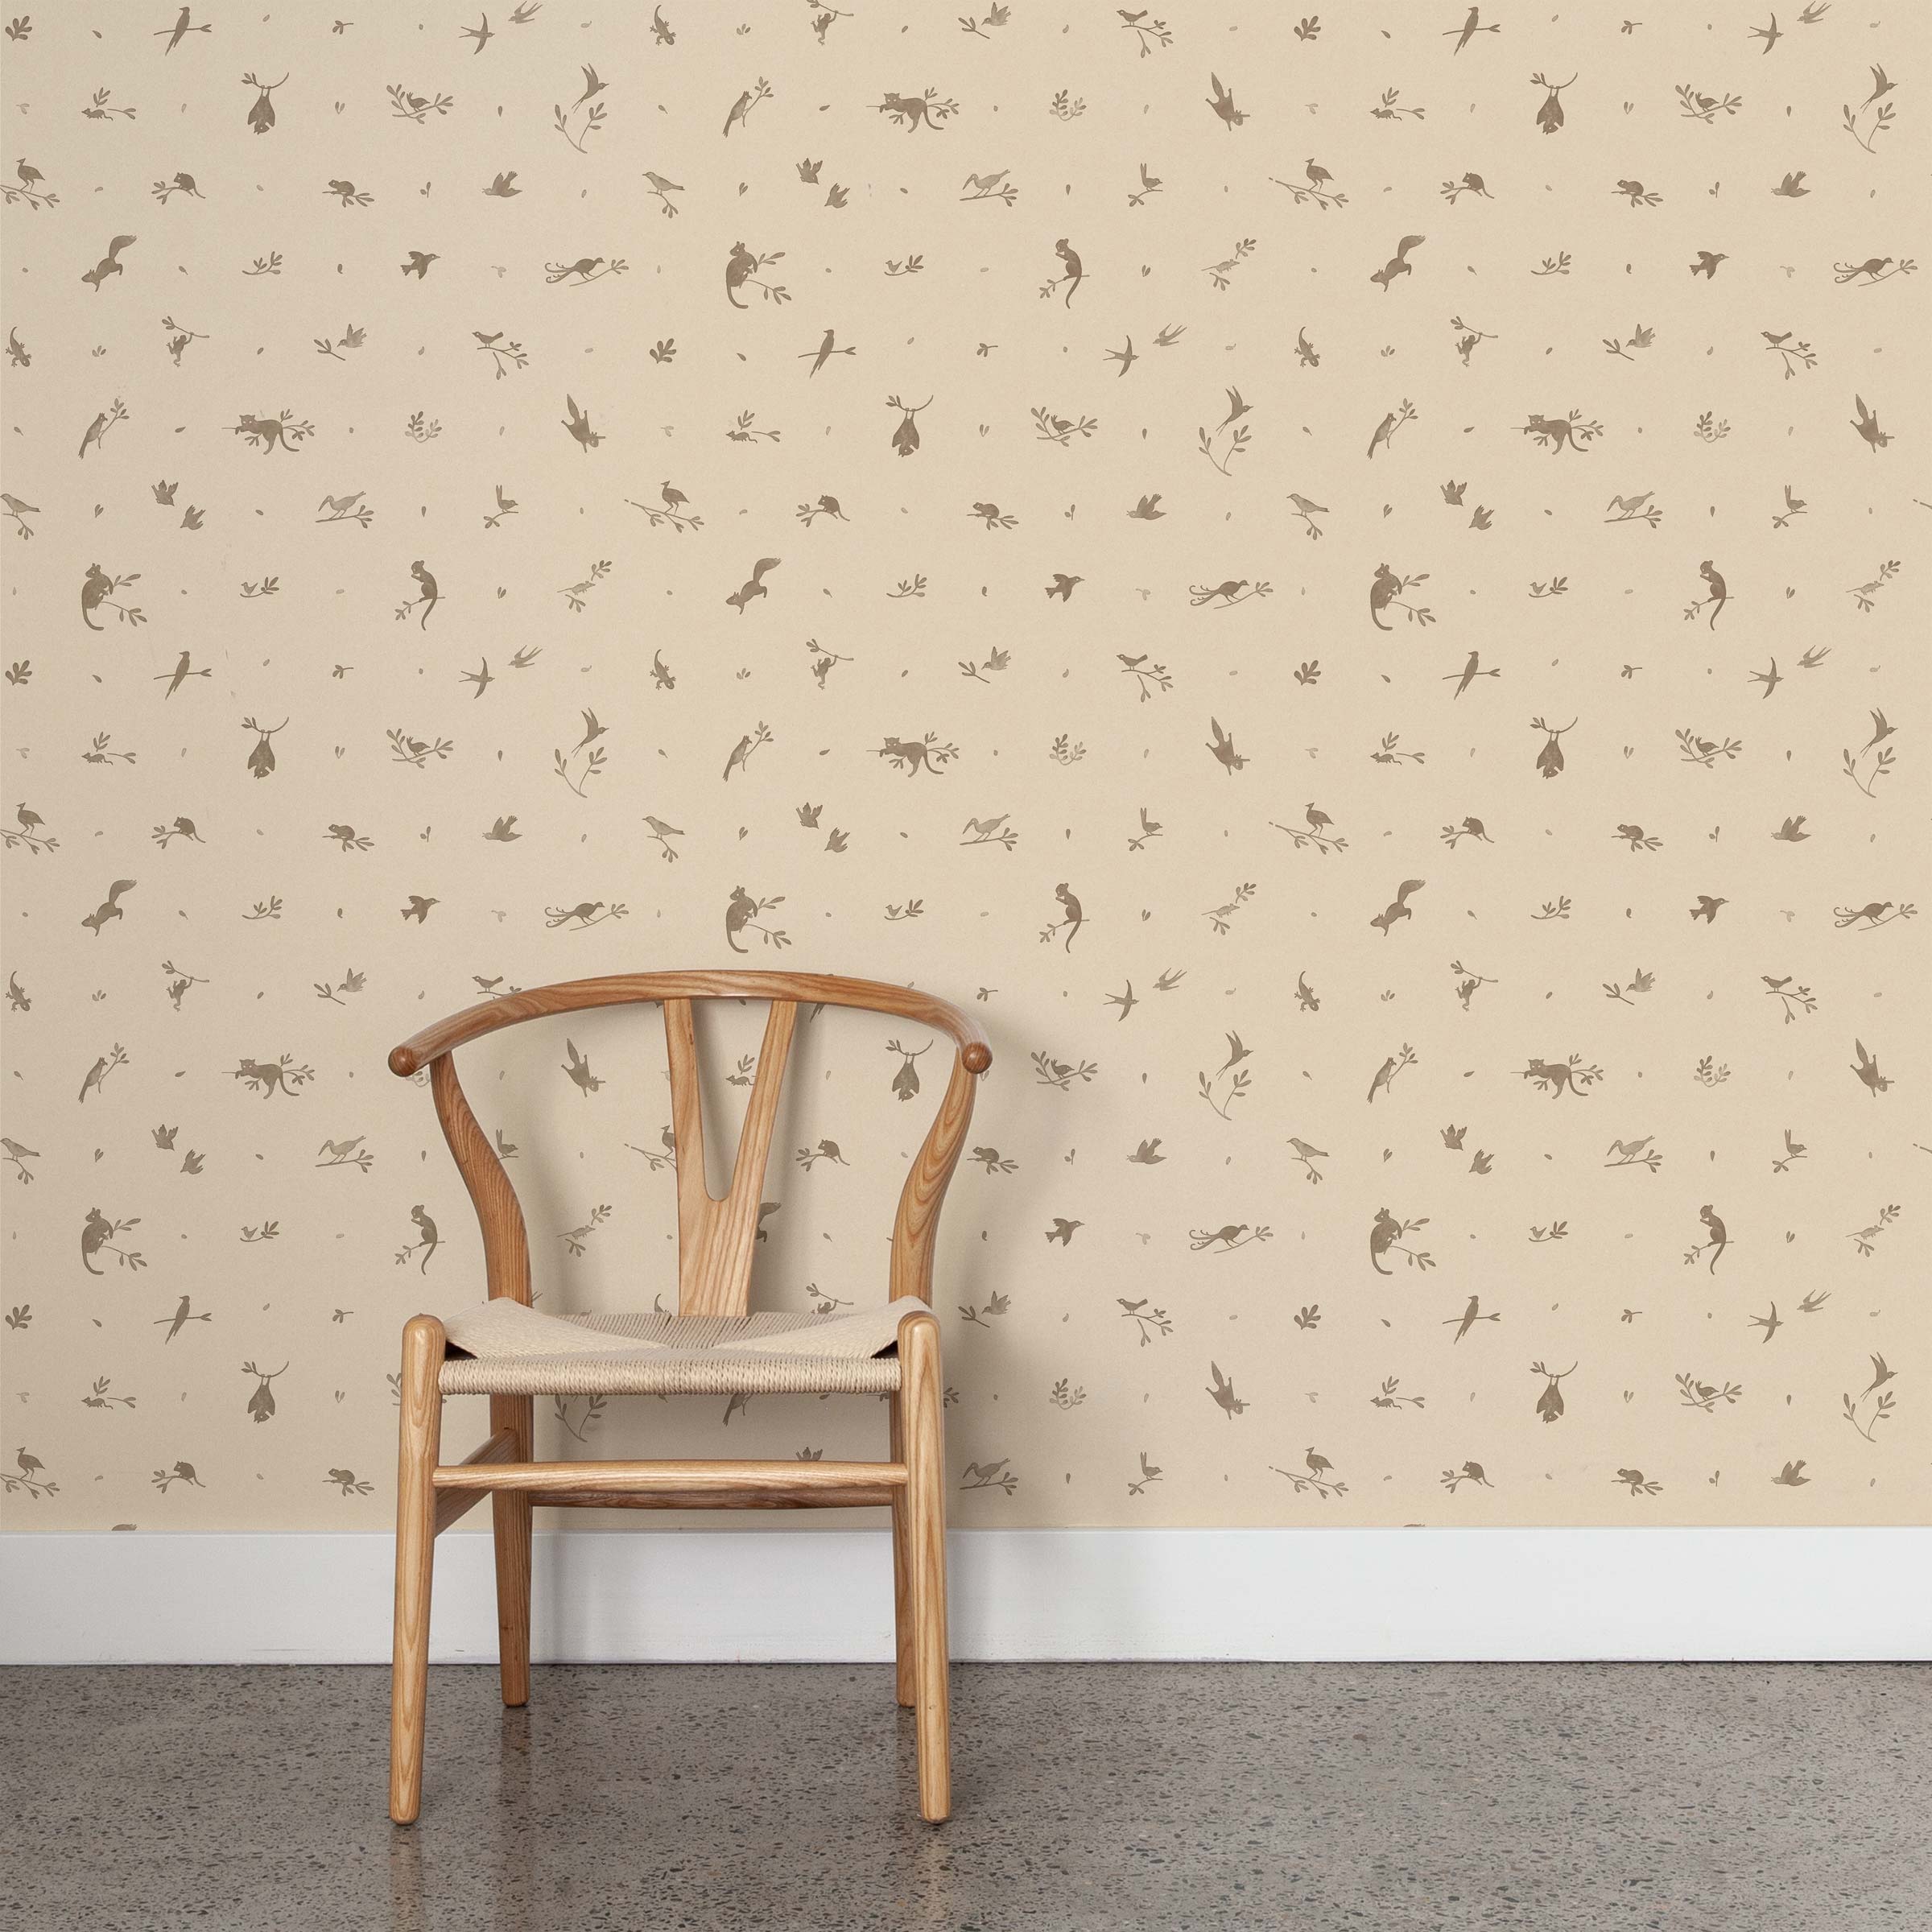 A wooden chair stands in front of a wall papered in a playful animal and branch print in brown on a cream field.